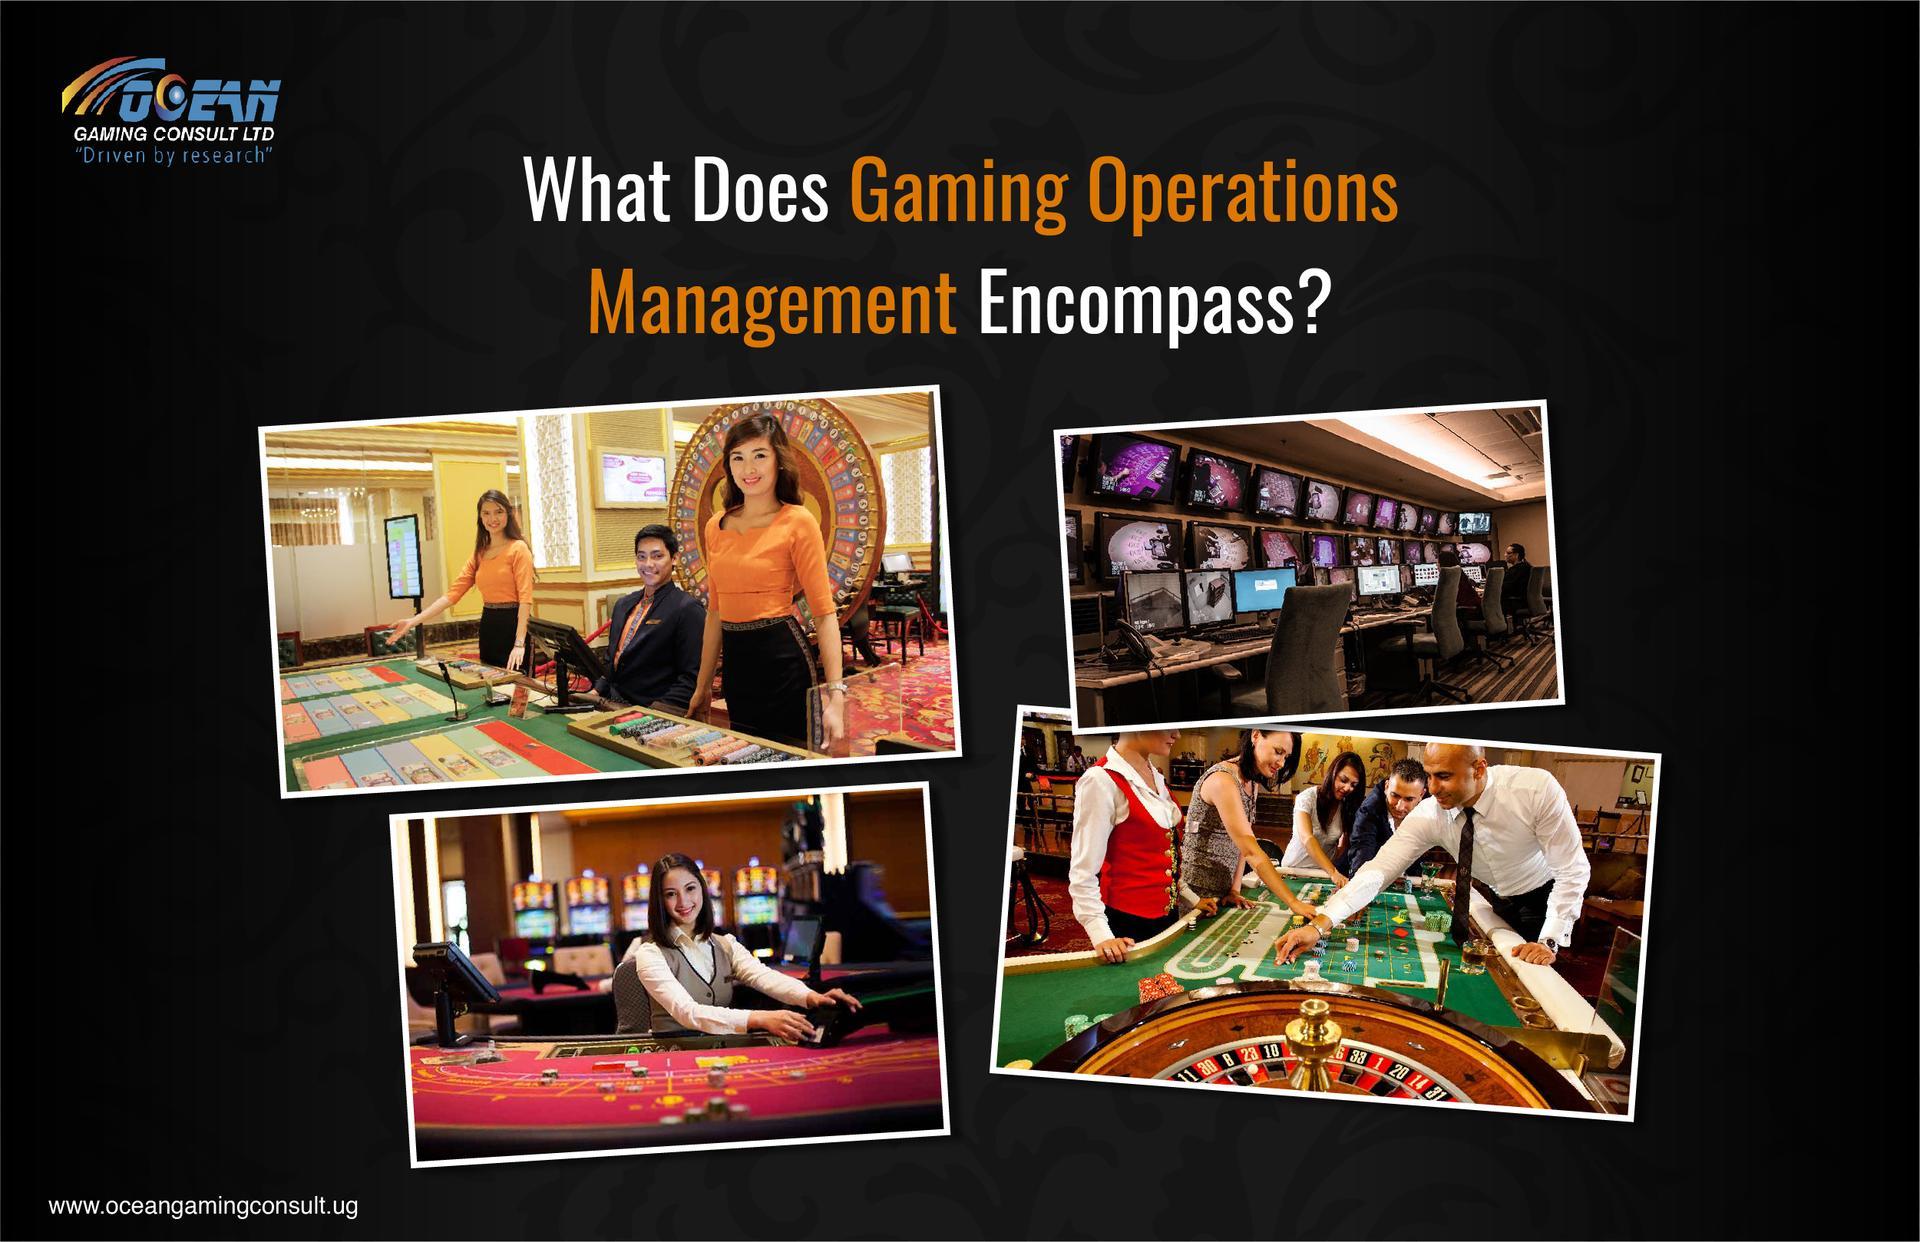 What Does Gaming Operations Management Encompass